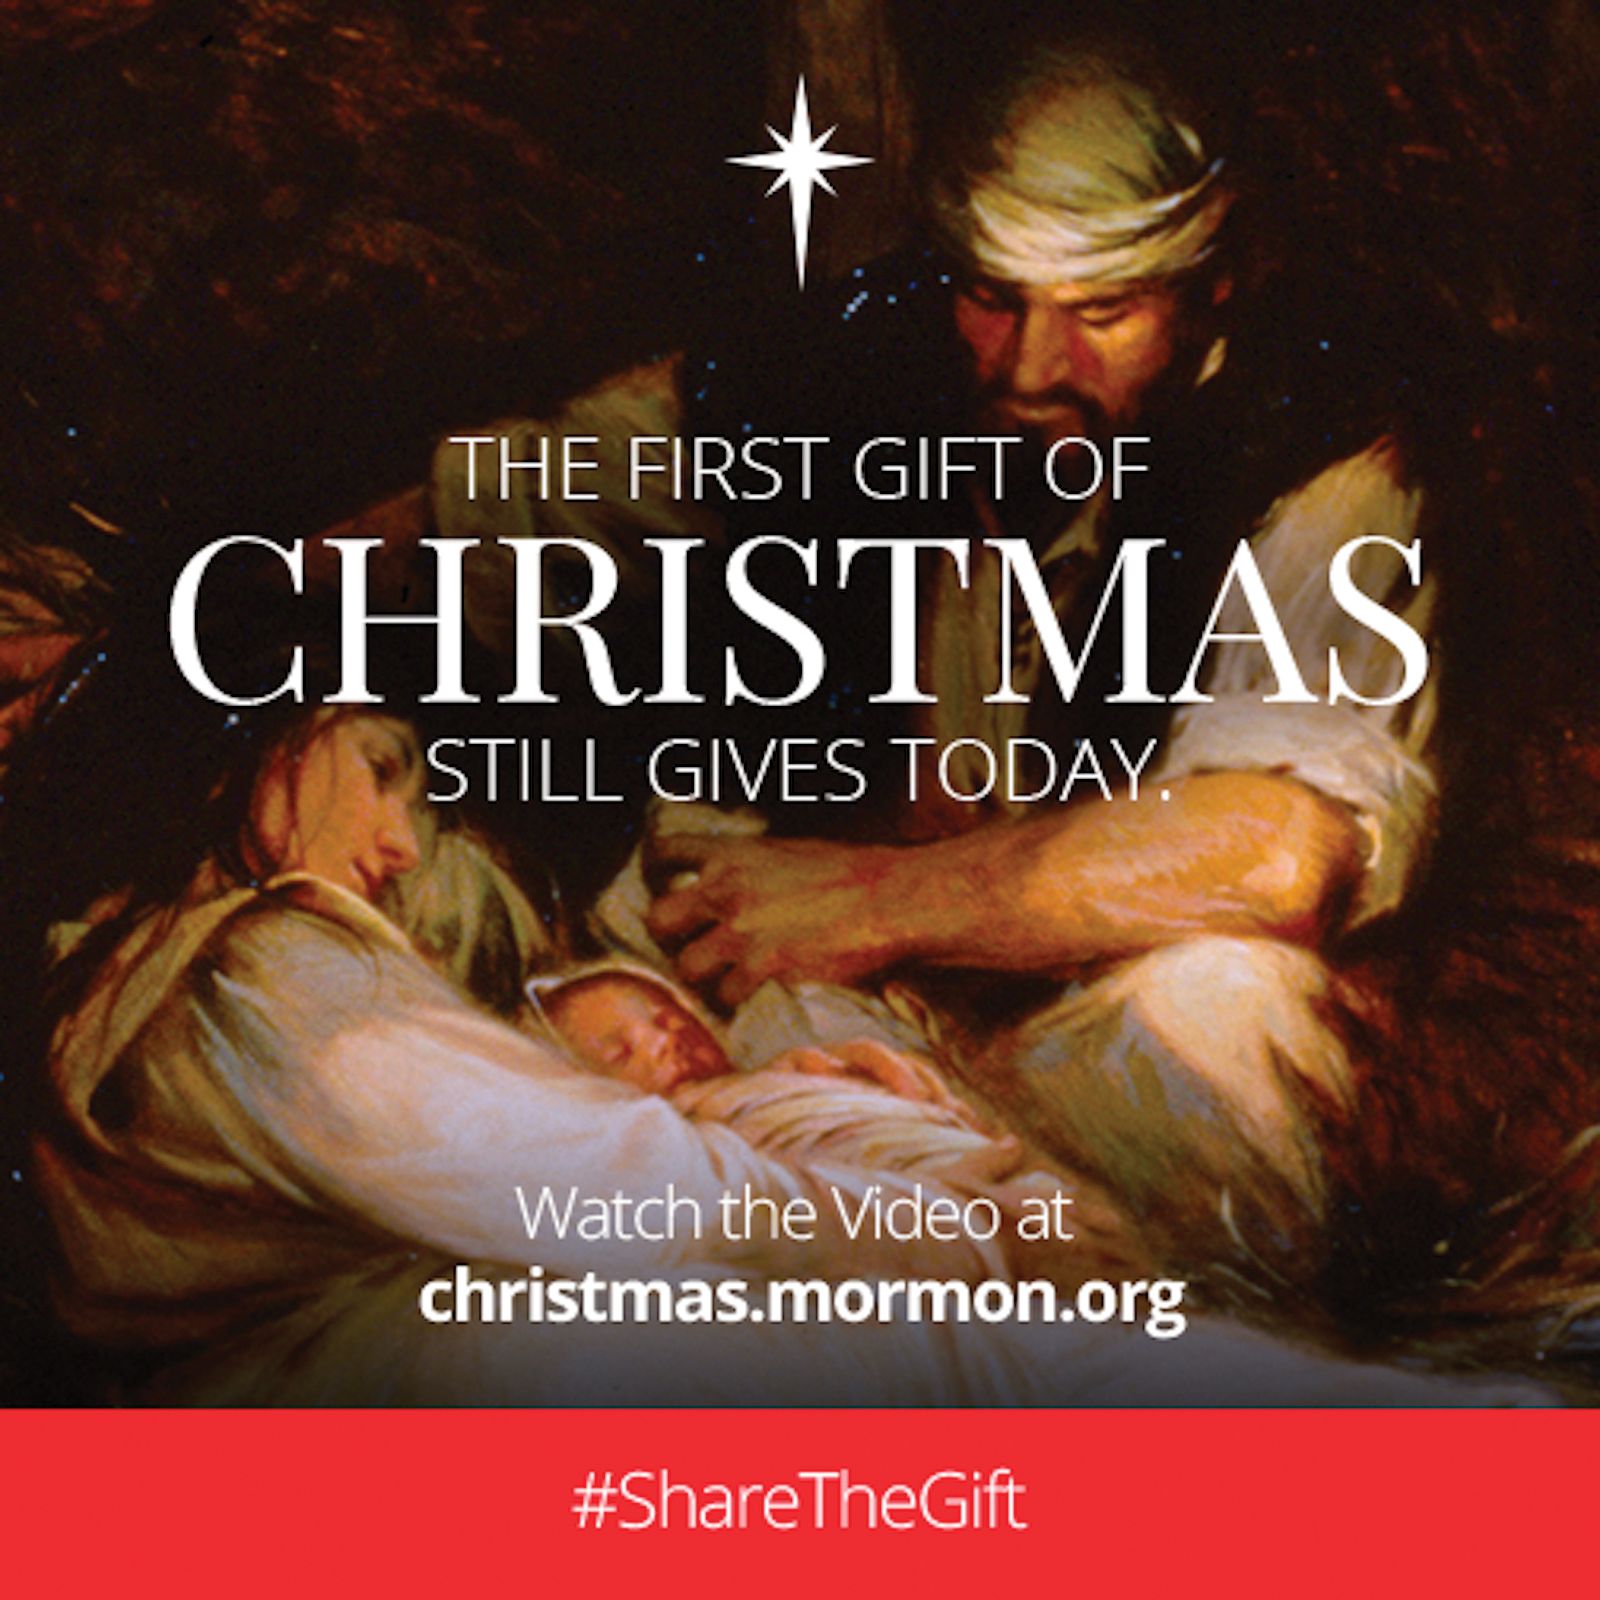 The first gift of Christmas still gives today. Watch the video at christmas.mormon.org. #ShareTheGift